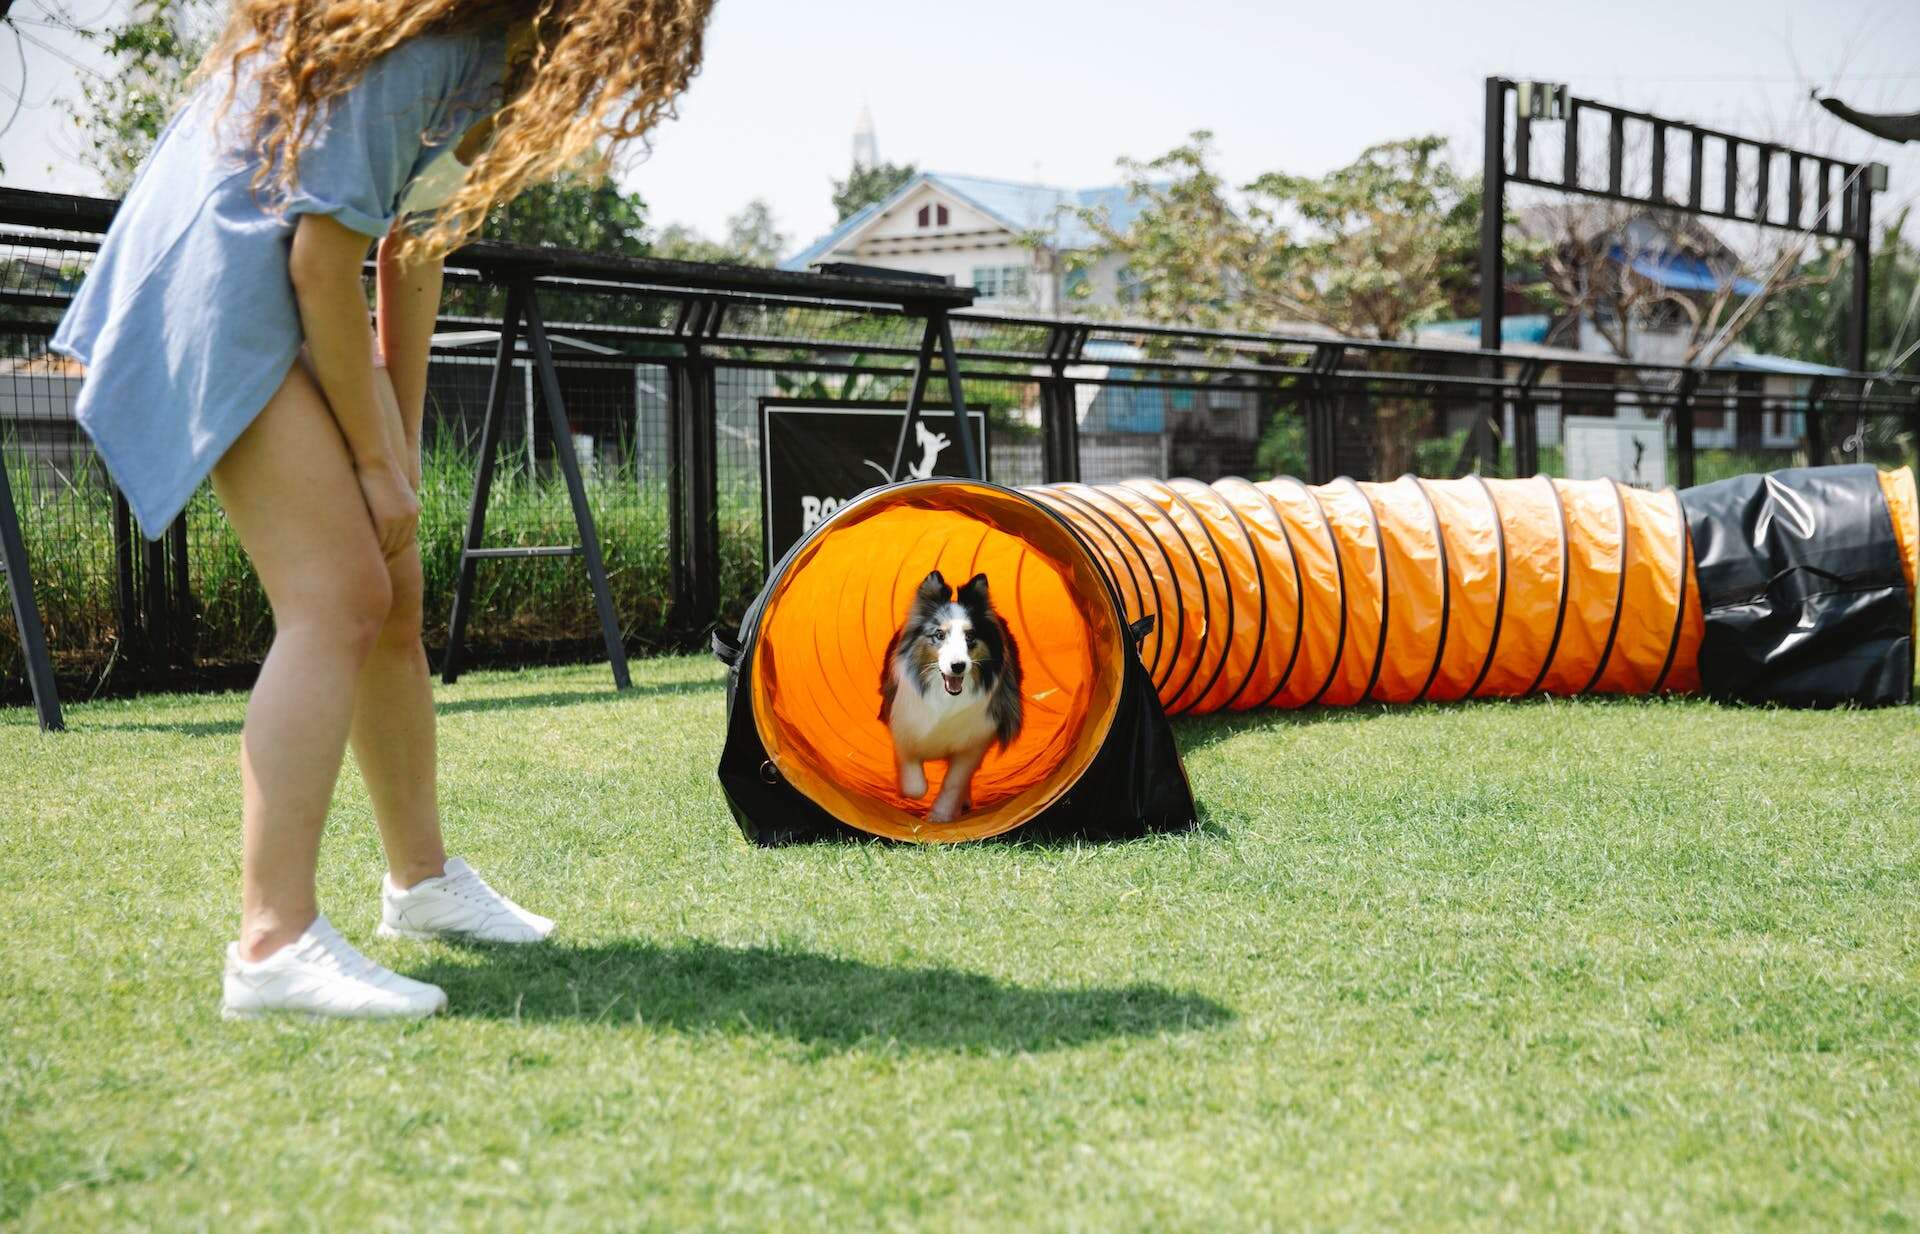 A dog running through an obstacle course in a lawn